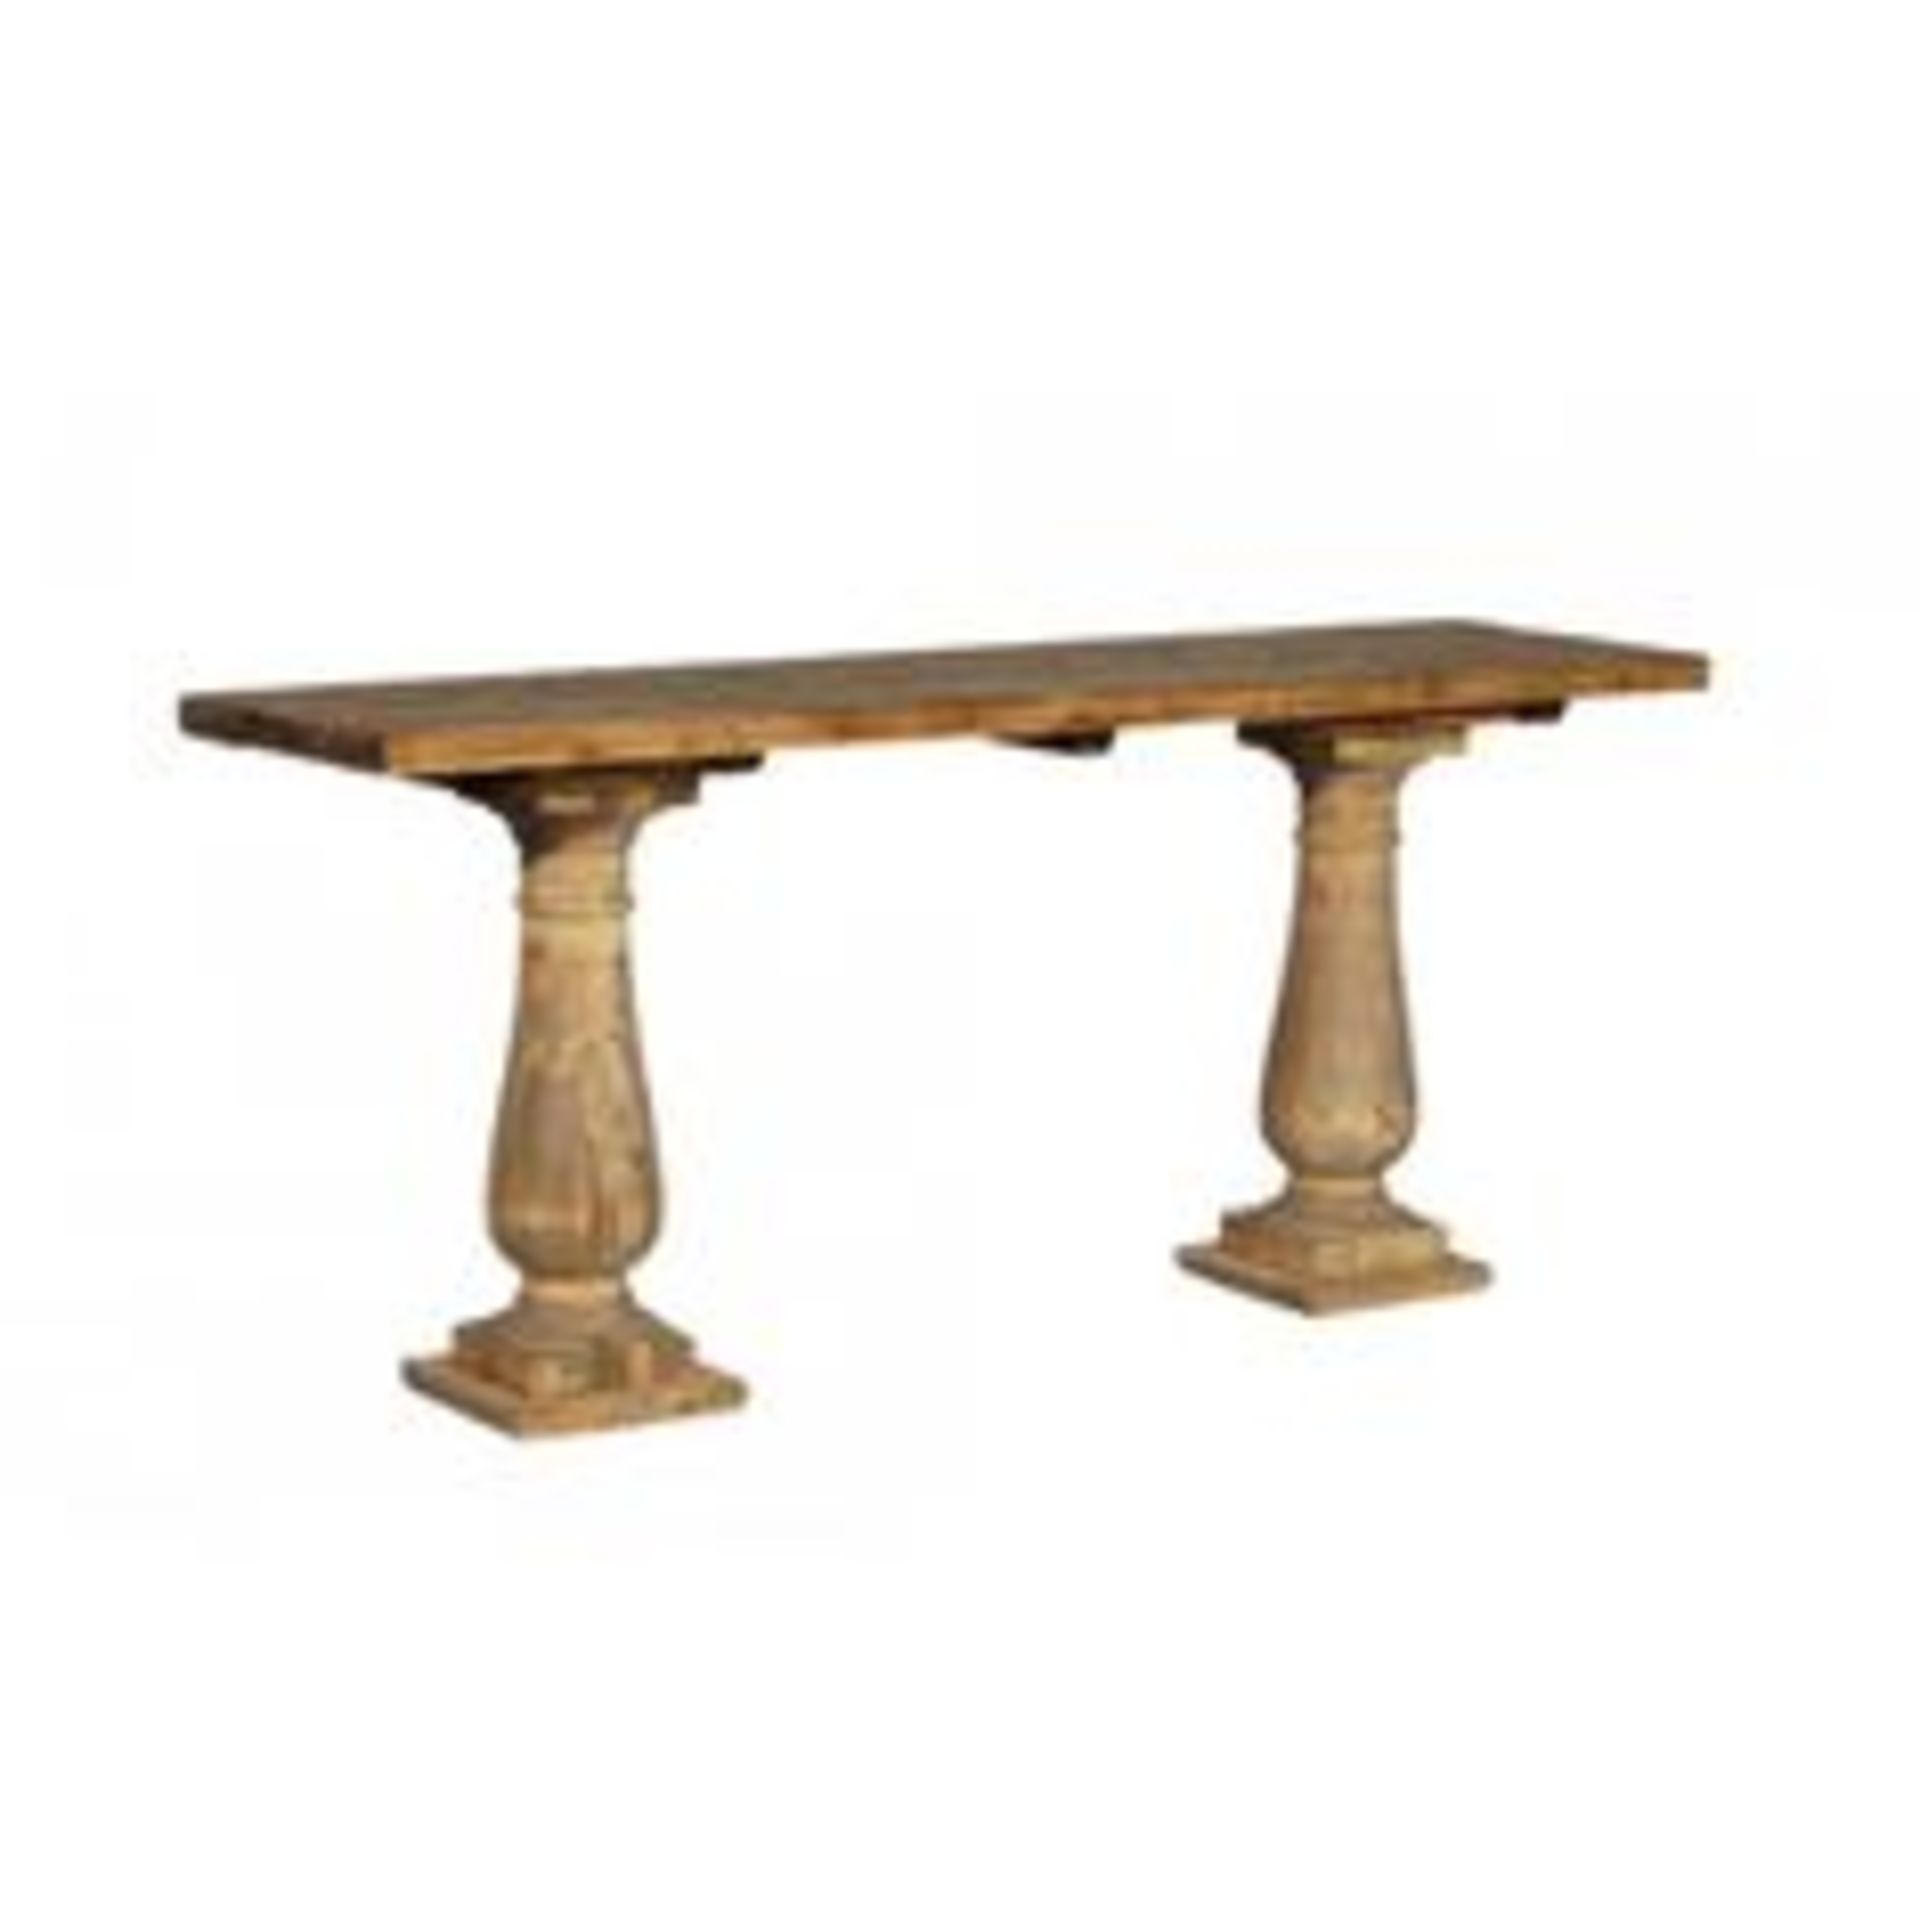 Old Grand Library Balustrade Console Genuine English Reclaimed Timber 180 X 46 X 76cm